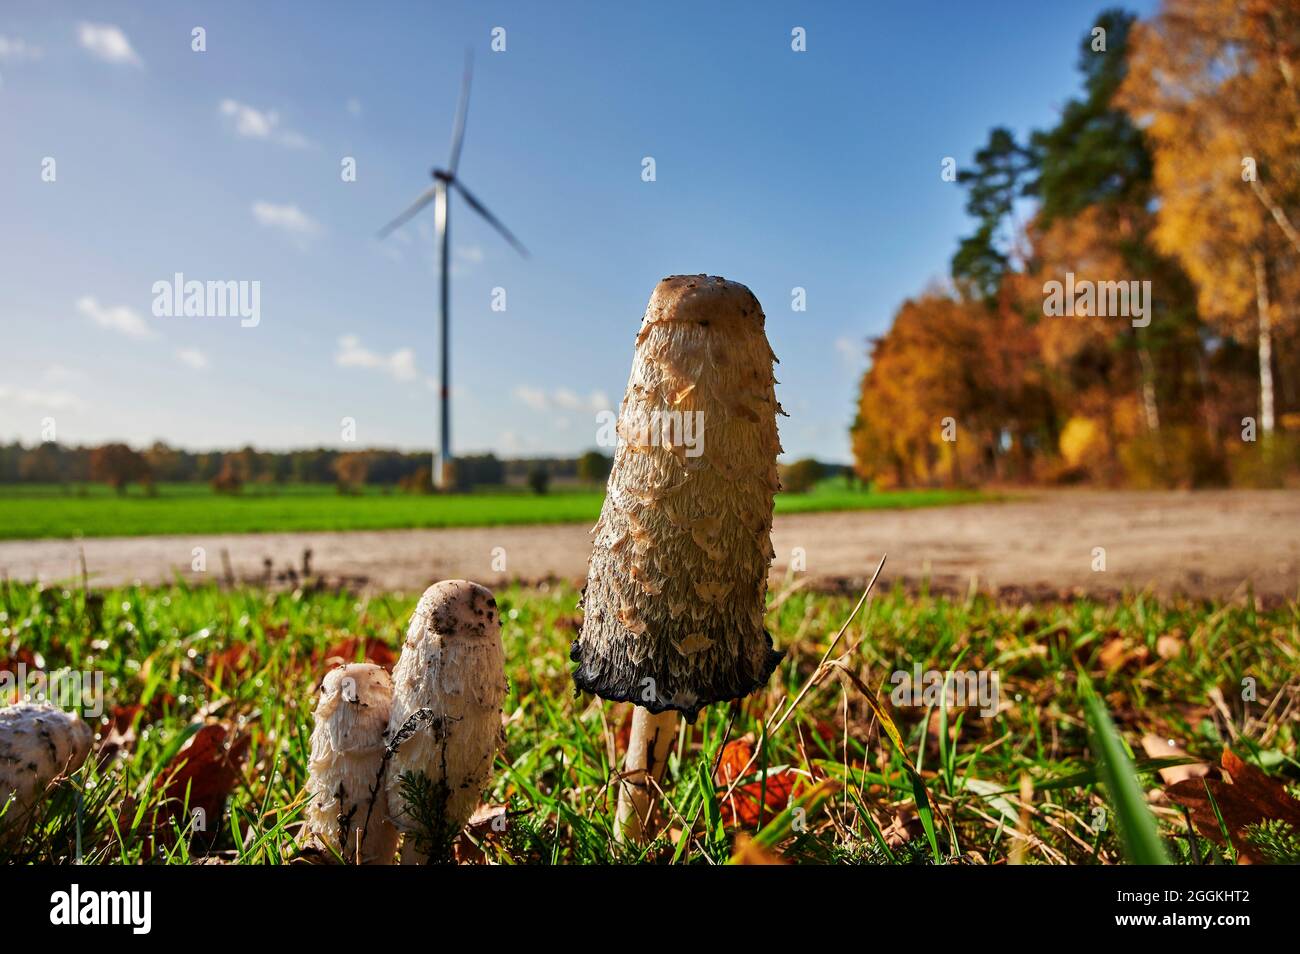 Ecological and close to nature, sustainability, mushrooms on a meadow in front of a wind power plant, the mushroom inlay has healing properties Stock Photo